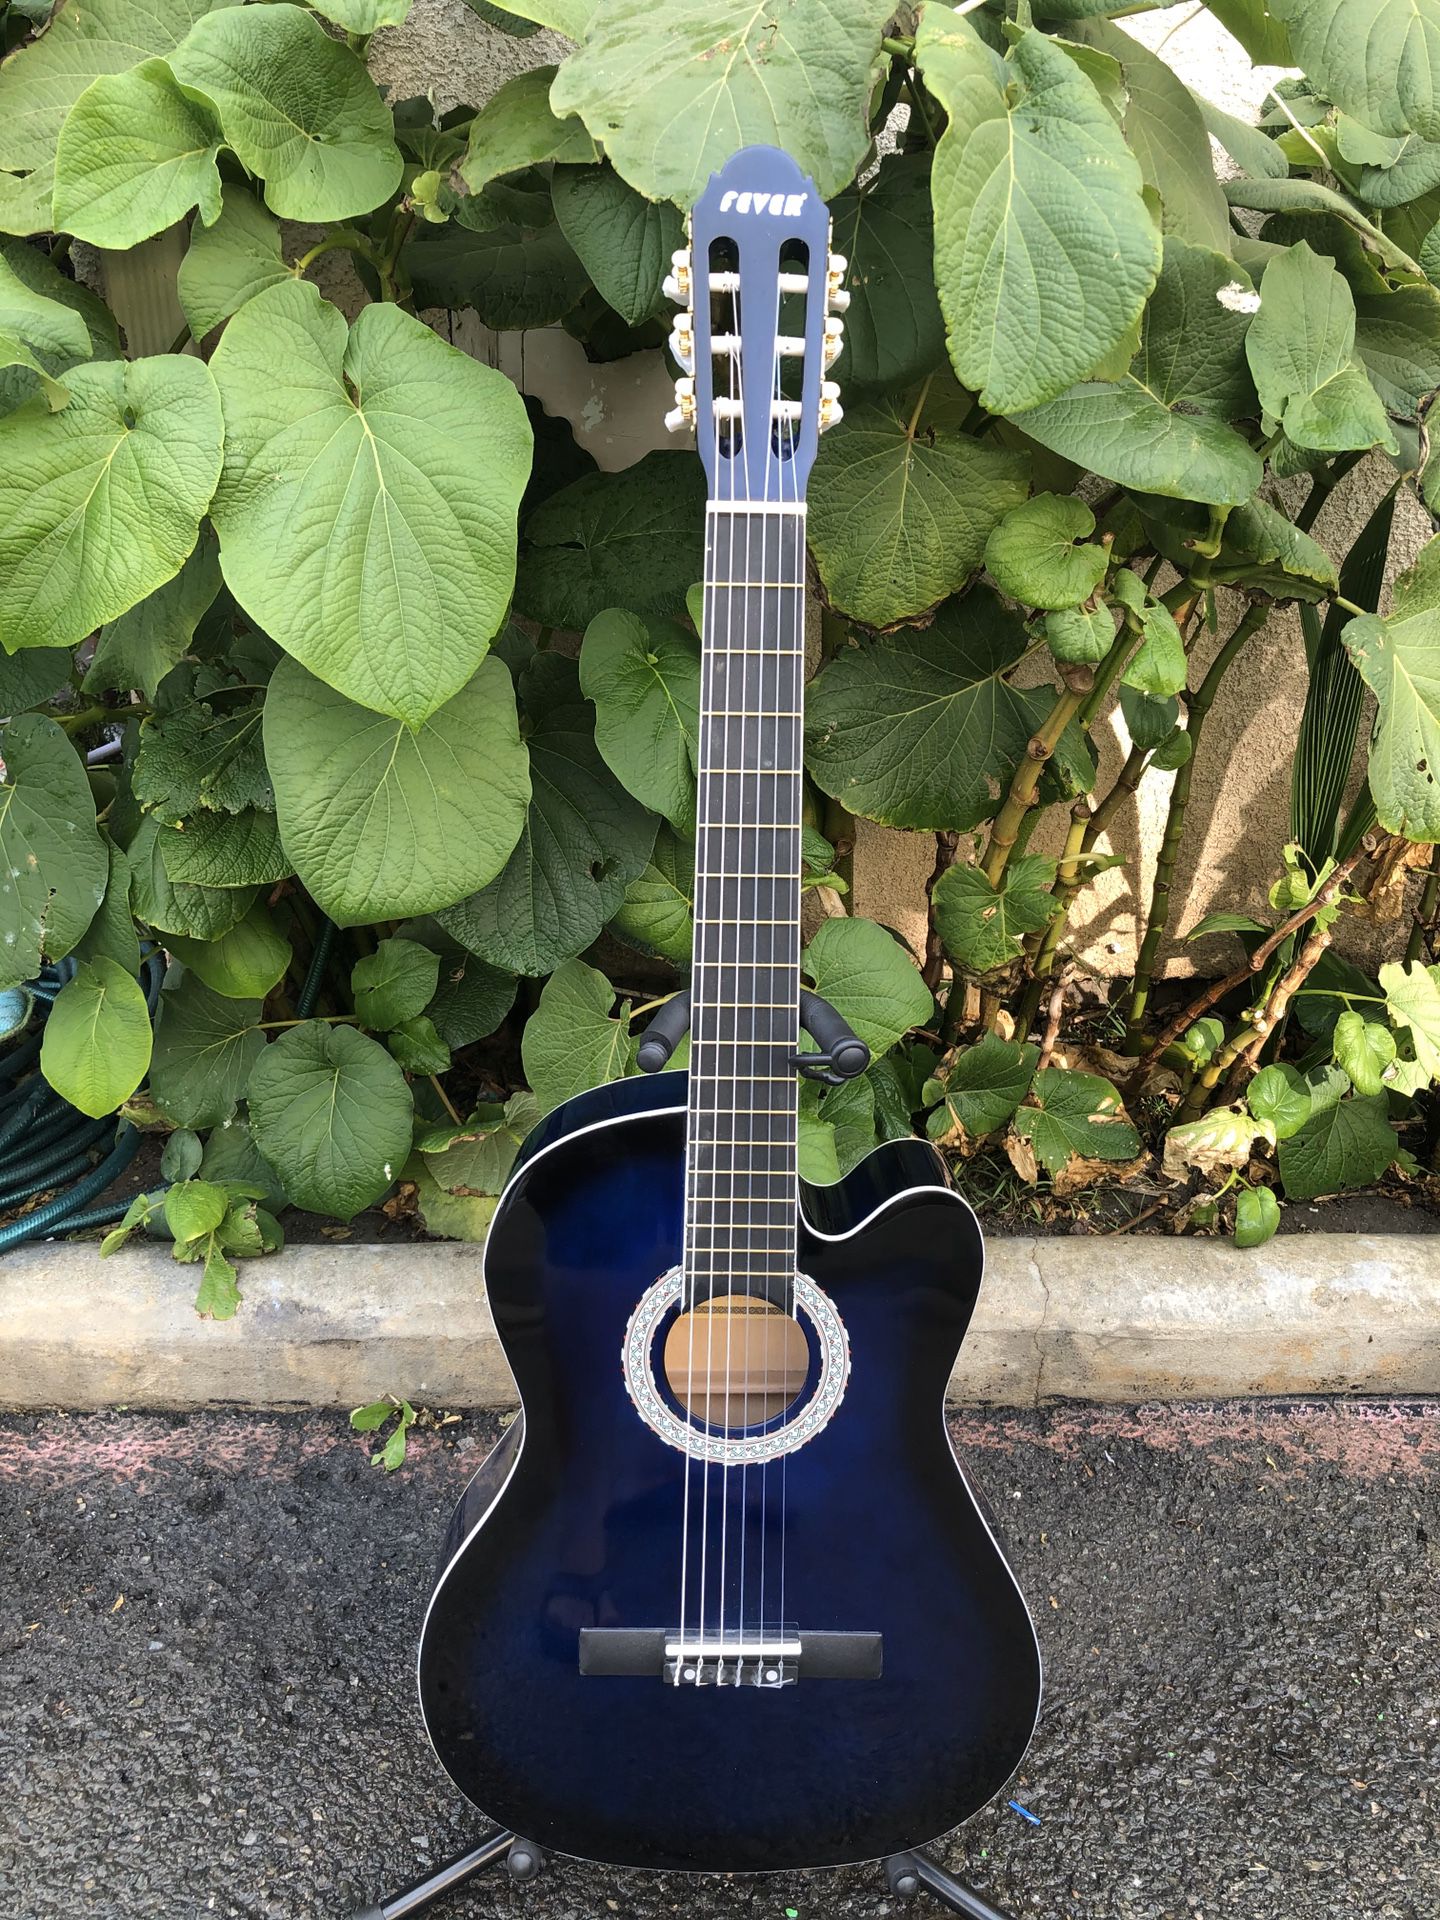 Fever classic acoustic guitar with nylon strings